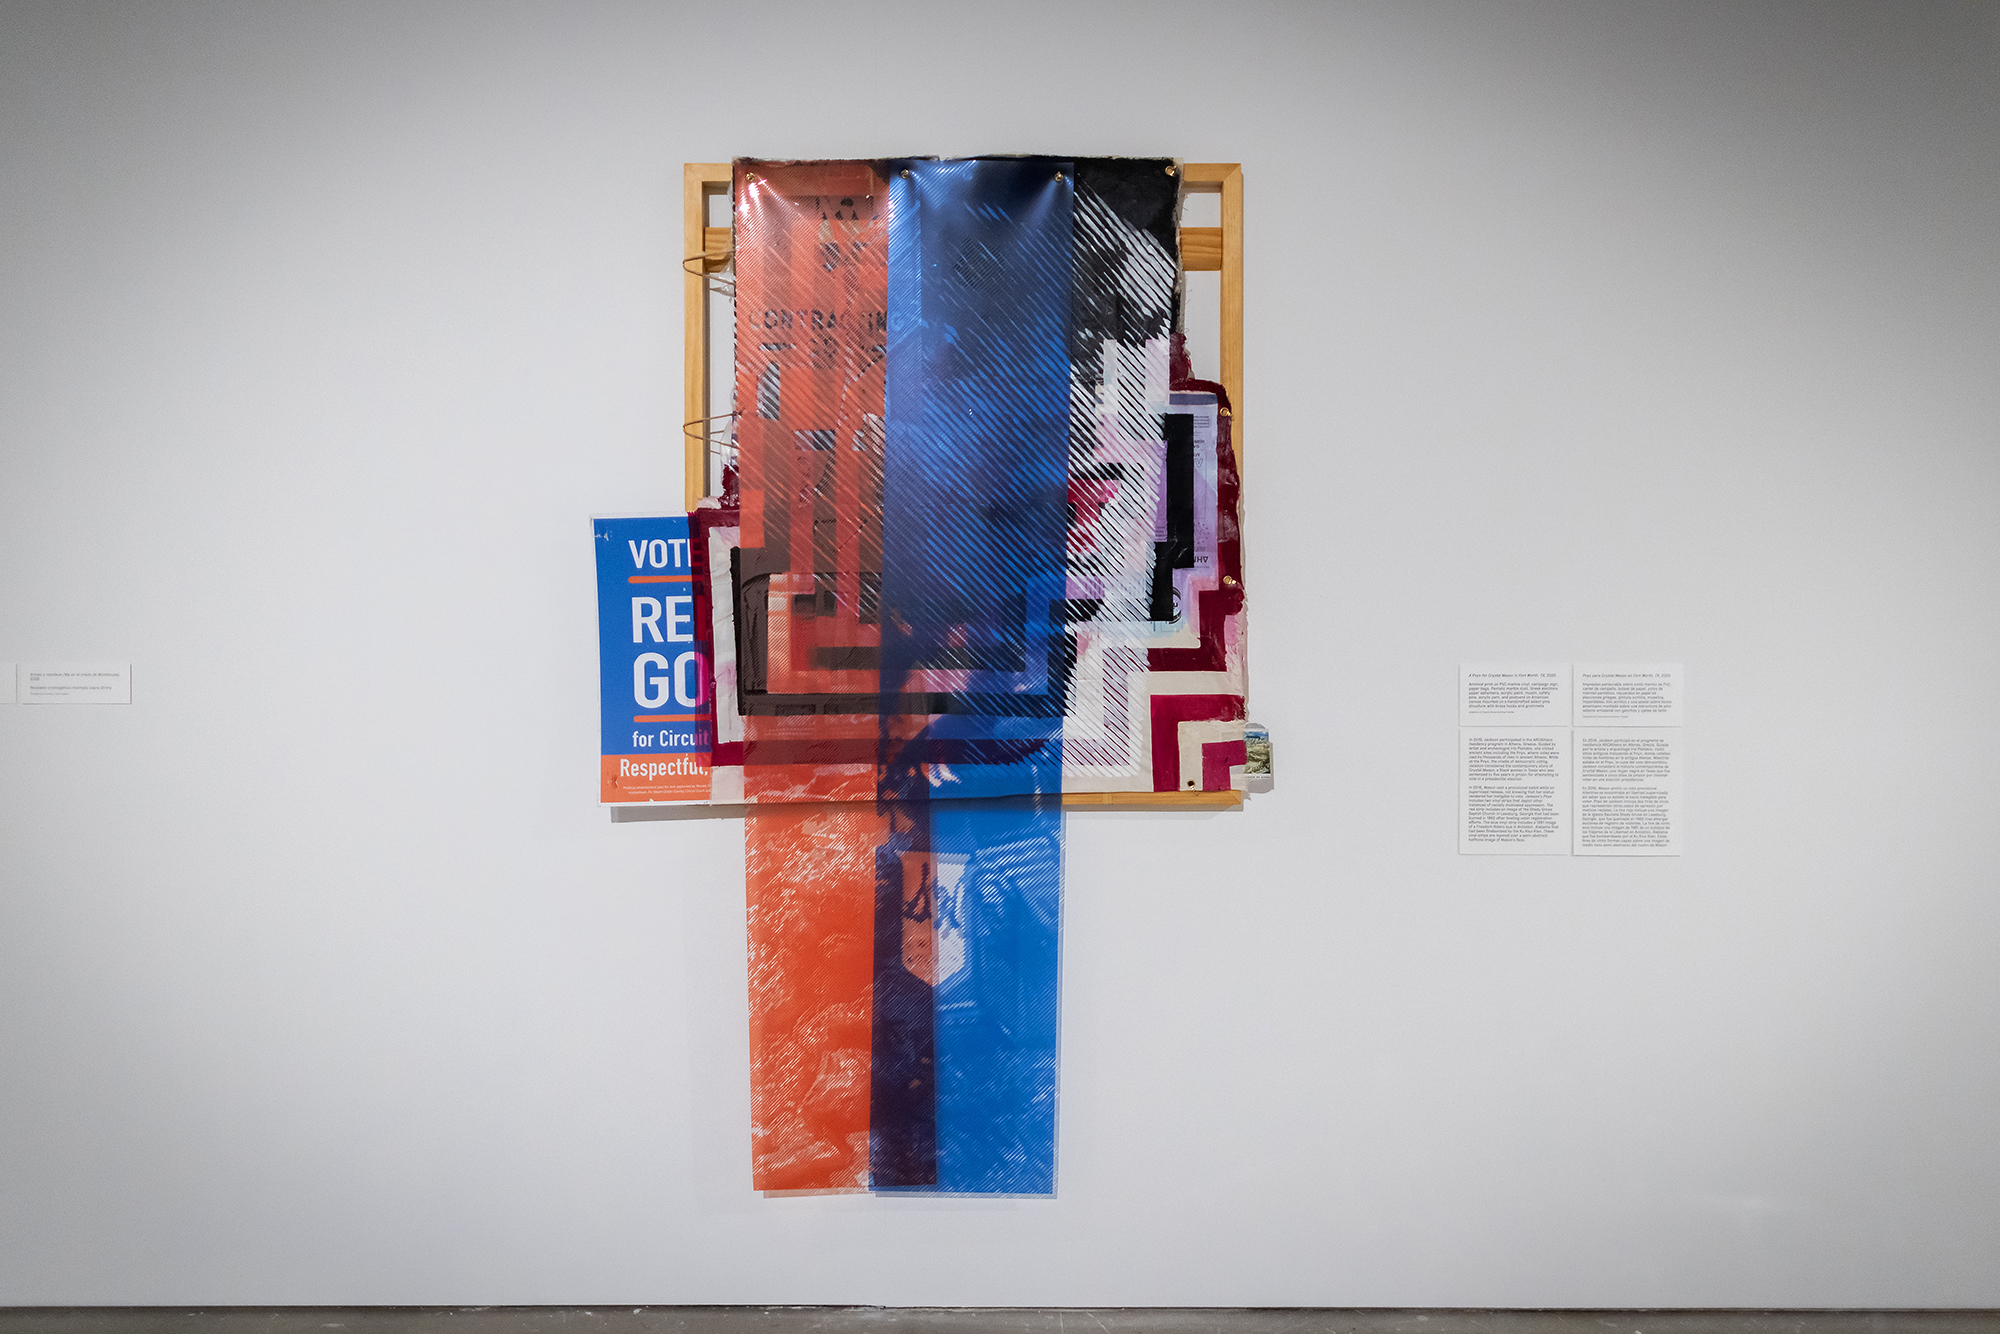 A painting exhibited with a vote sign peeking from behind several layers of material.